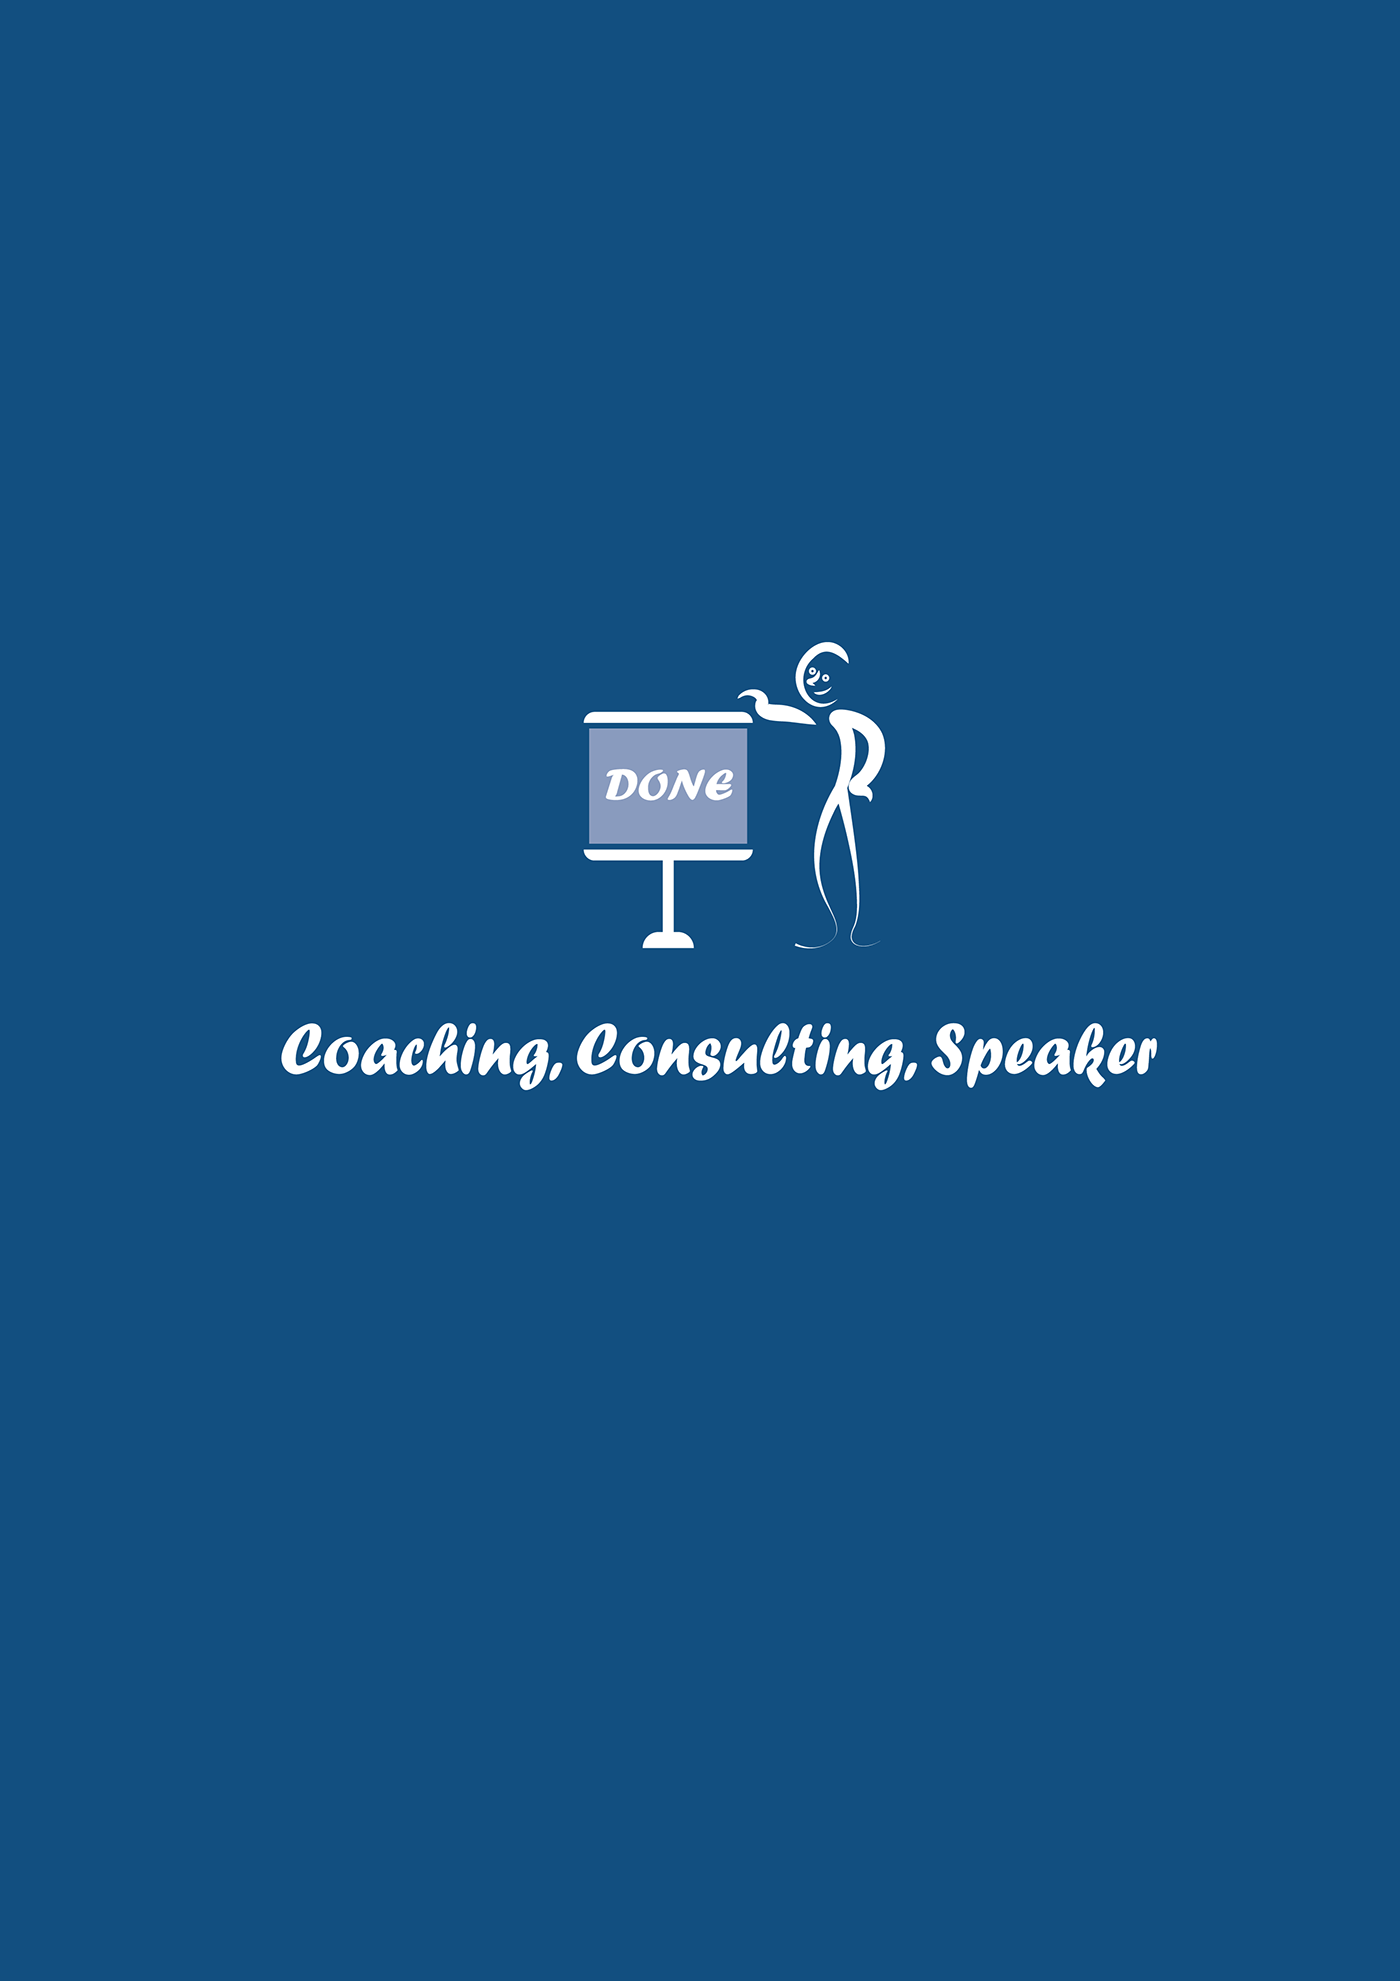 Advertising  business coatching company concept consulting logo corporate done speaker design unique logo